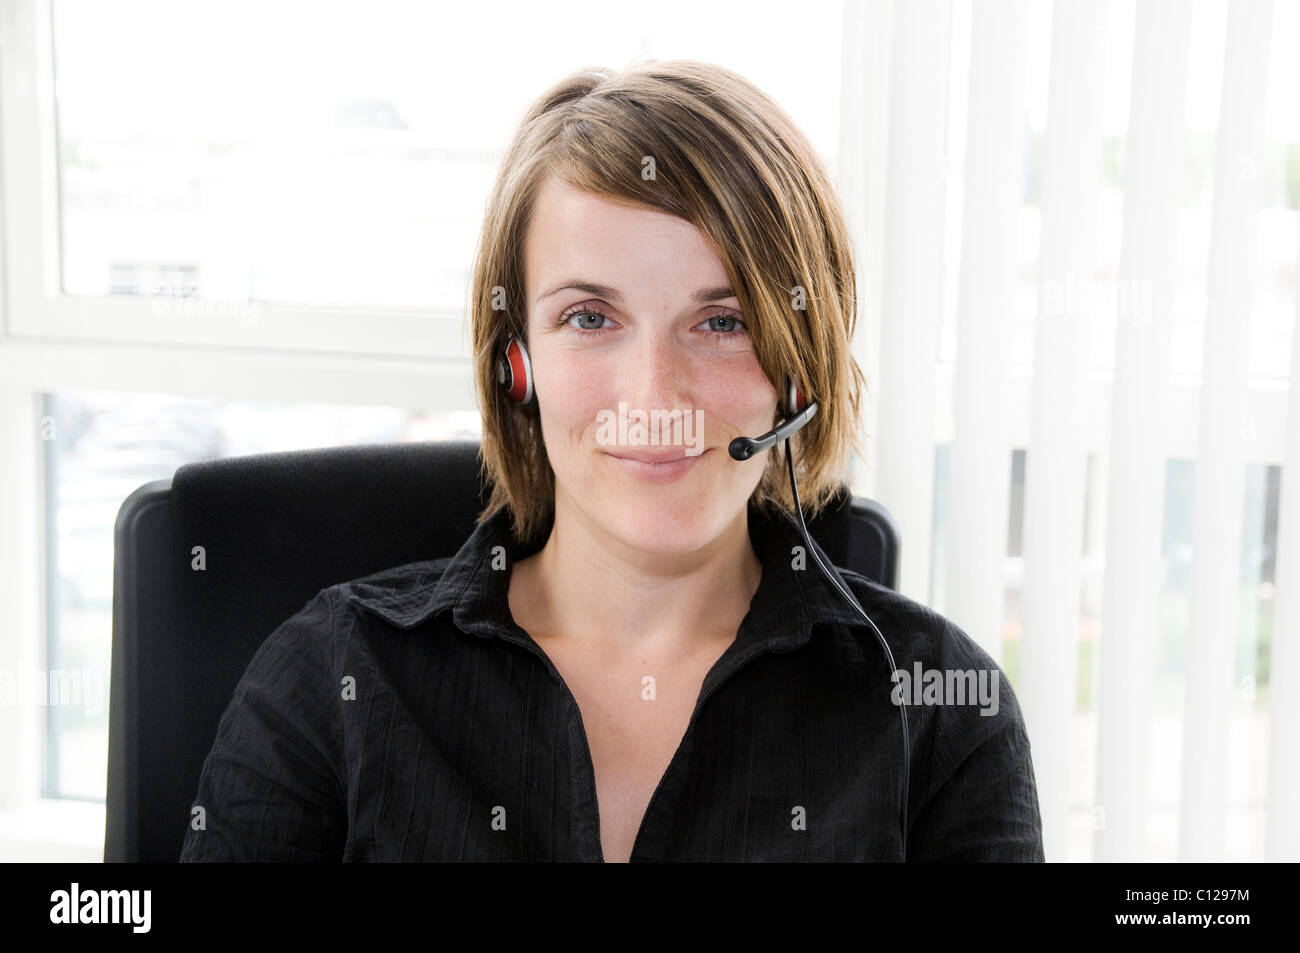 Woman with headset Stock Photo